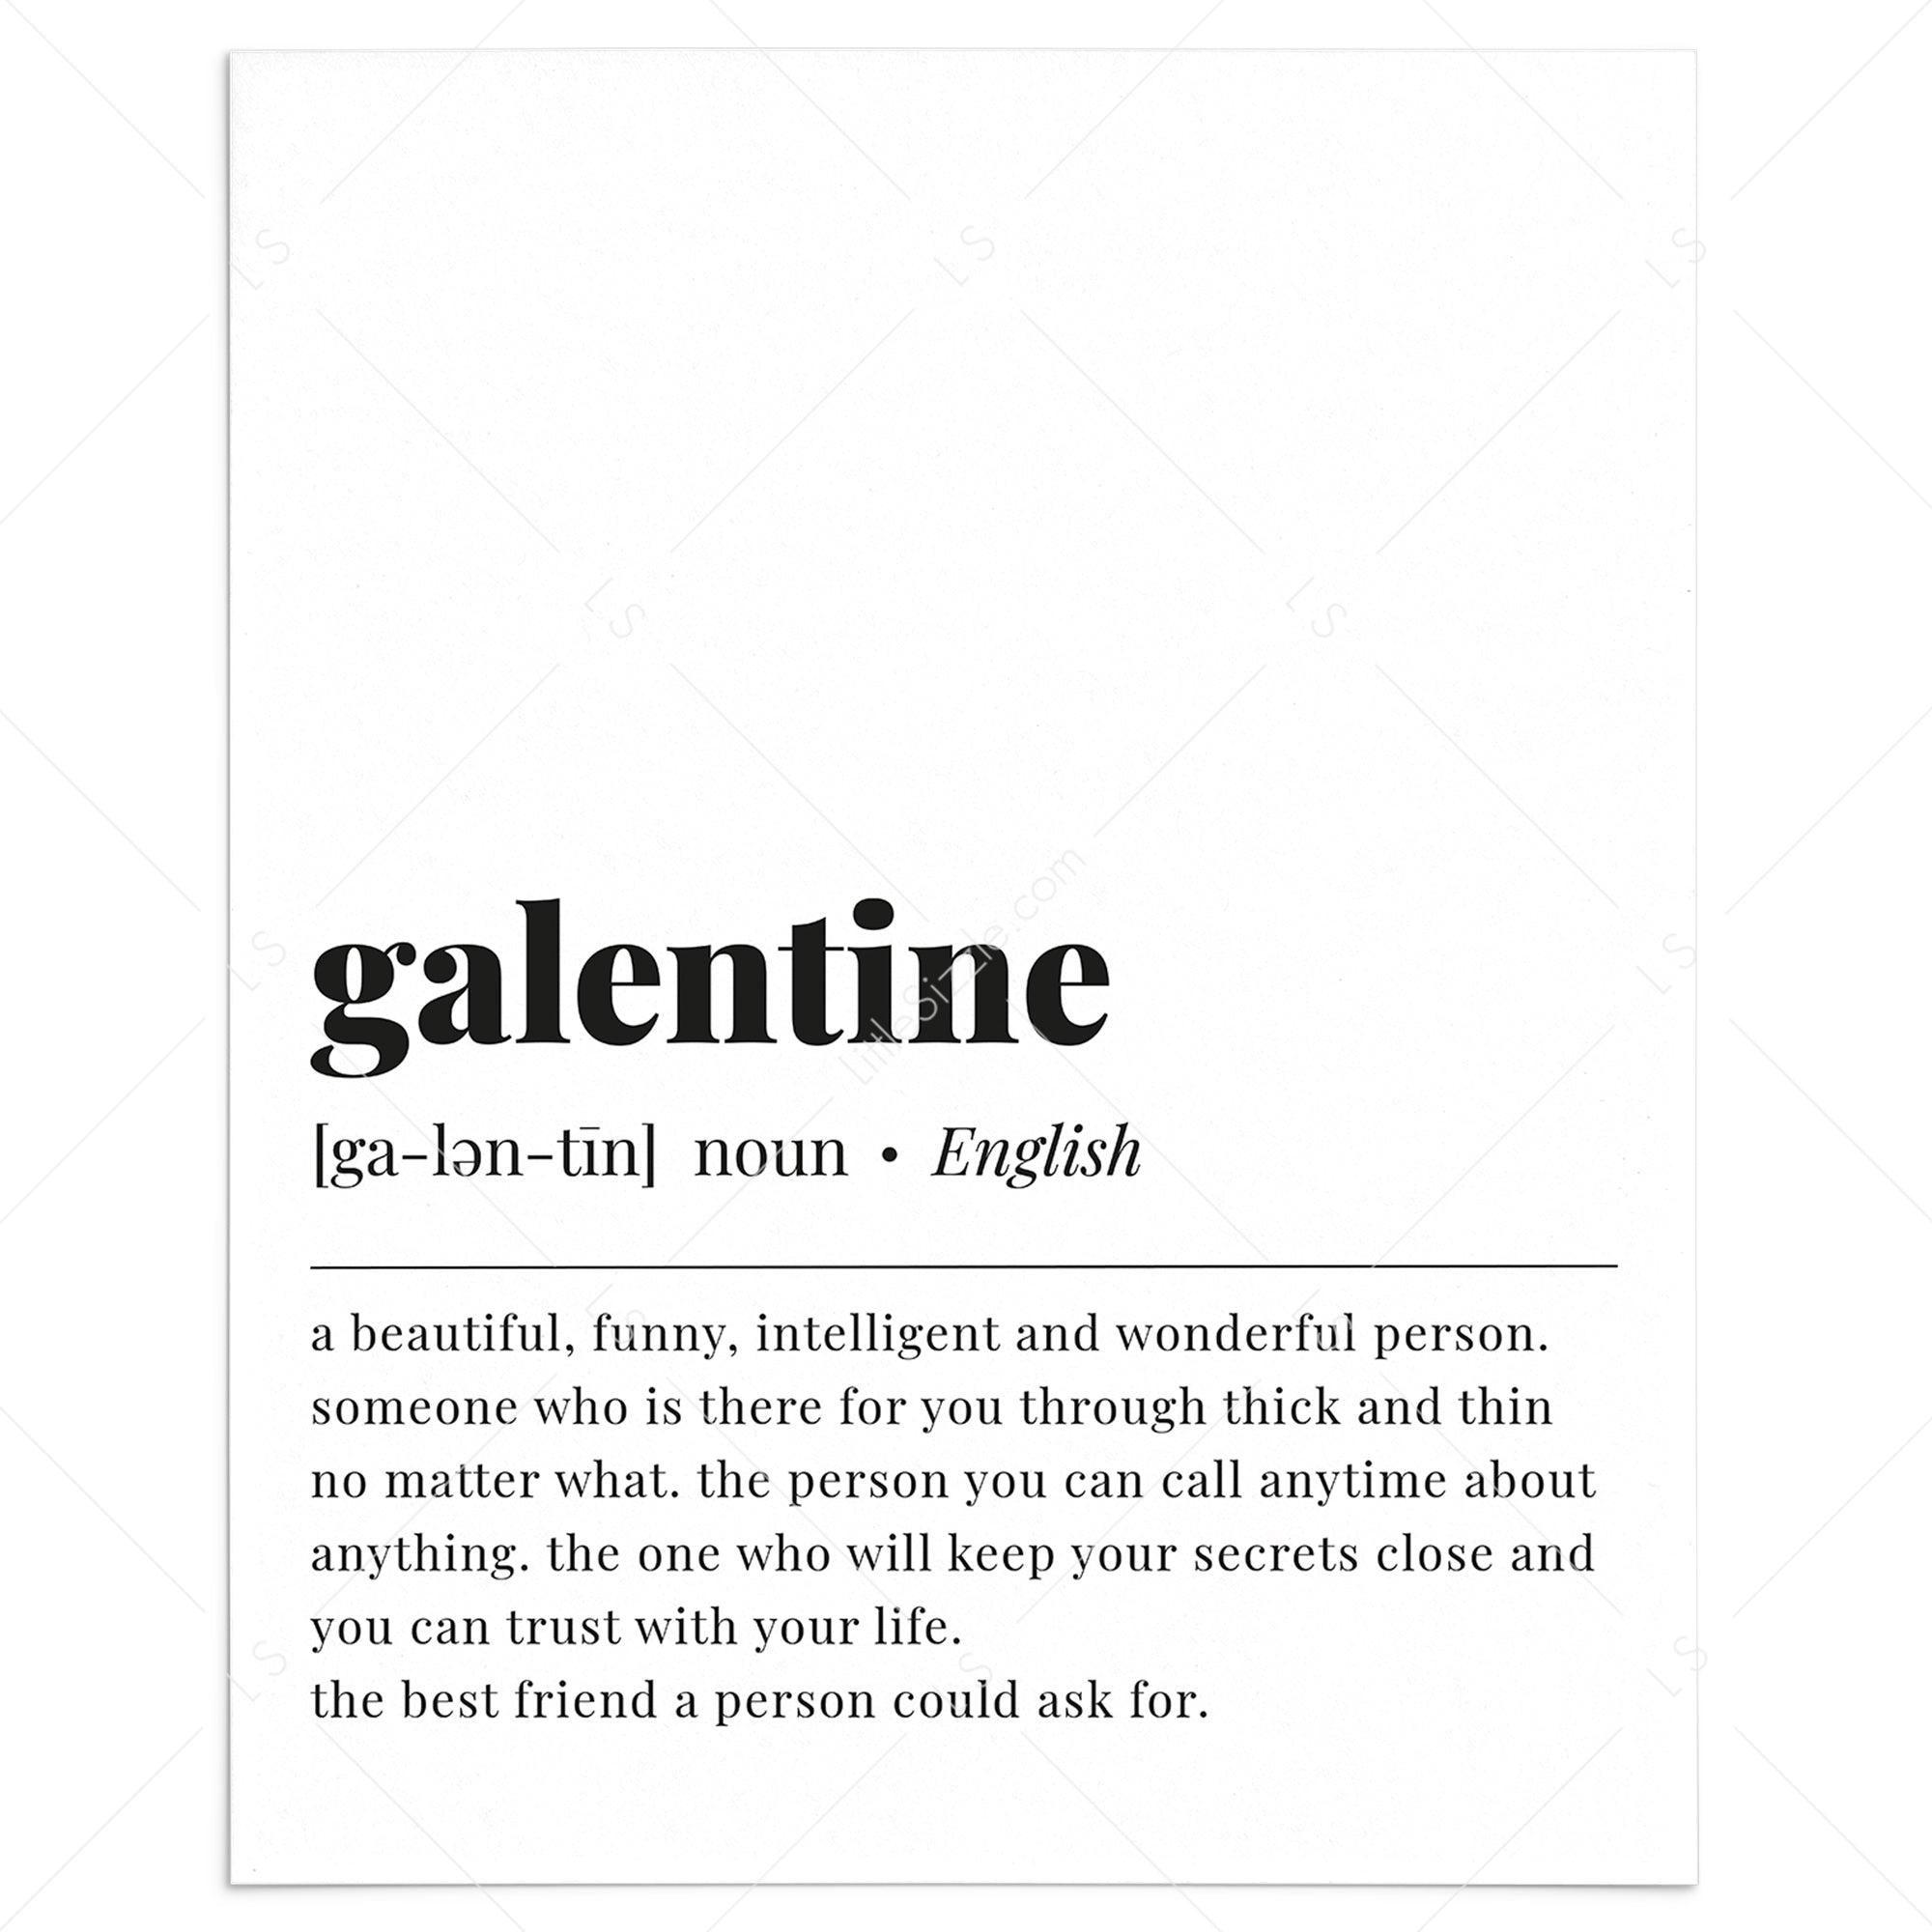 Galentine Definition Printable by LittleSizzle